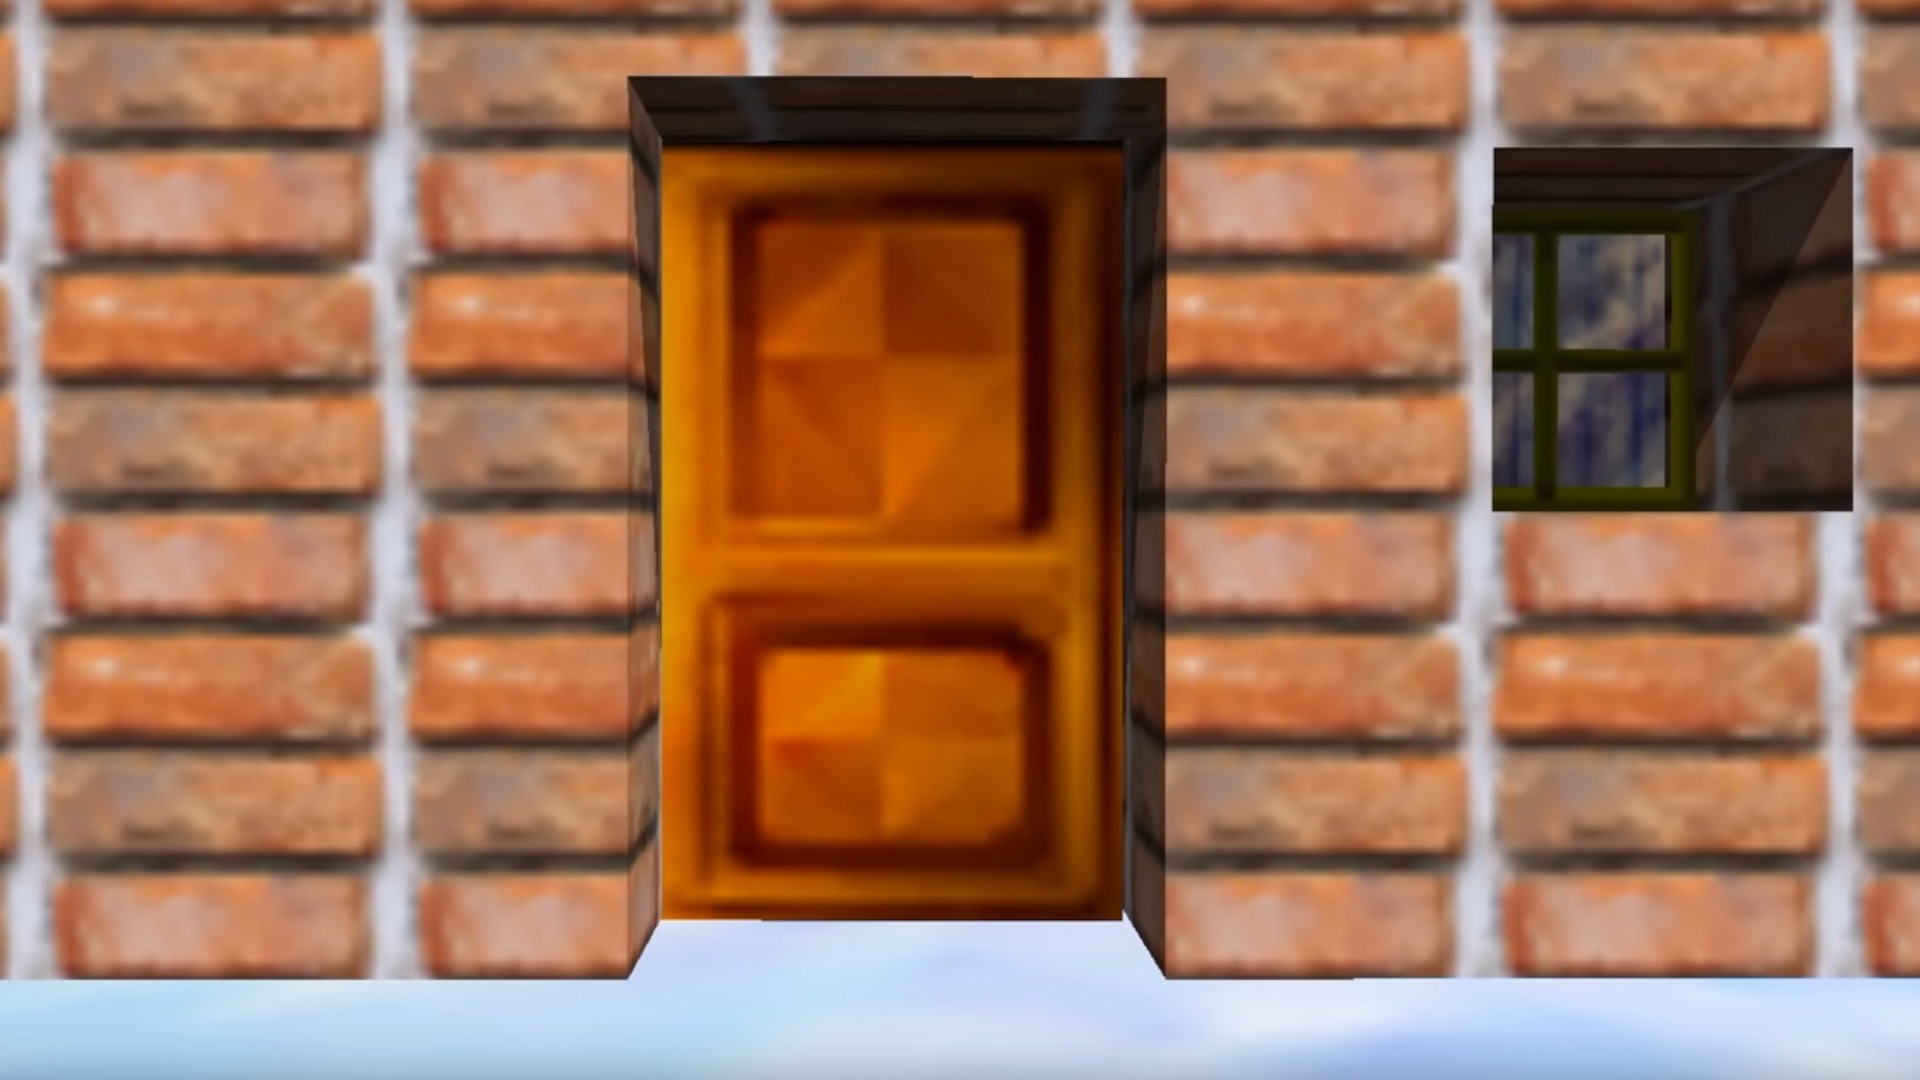 The door to Super Mario 64, which has been closed since 1996, has finally opened.